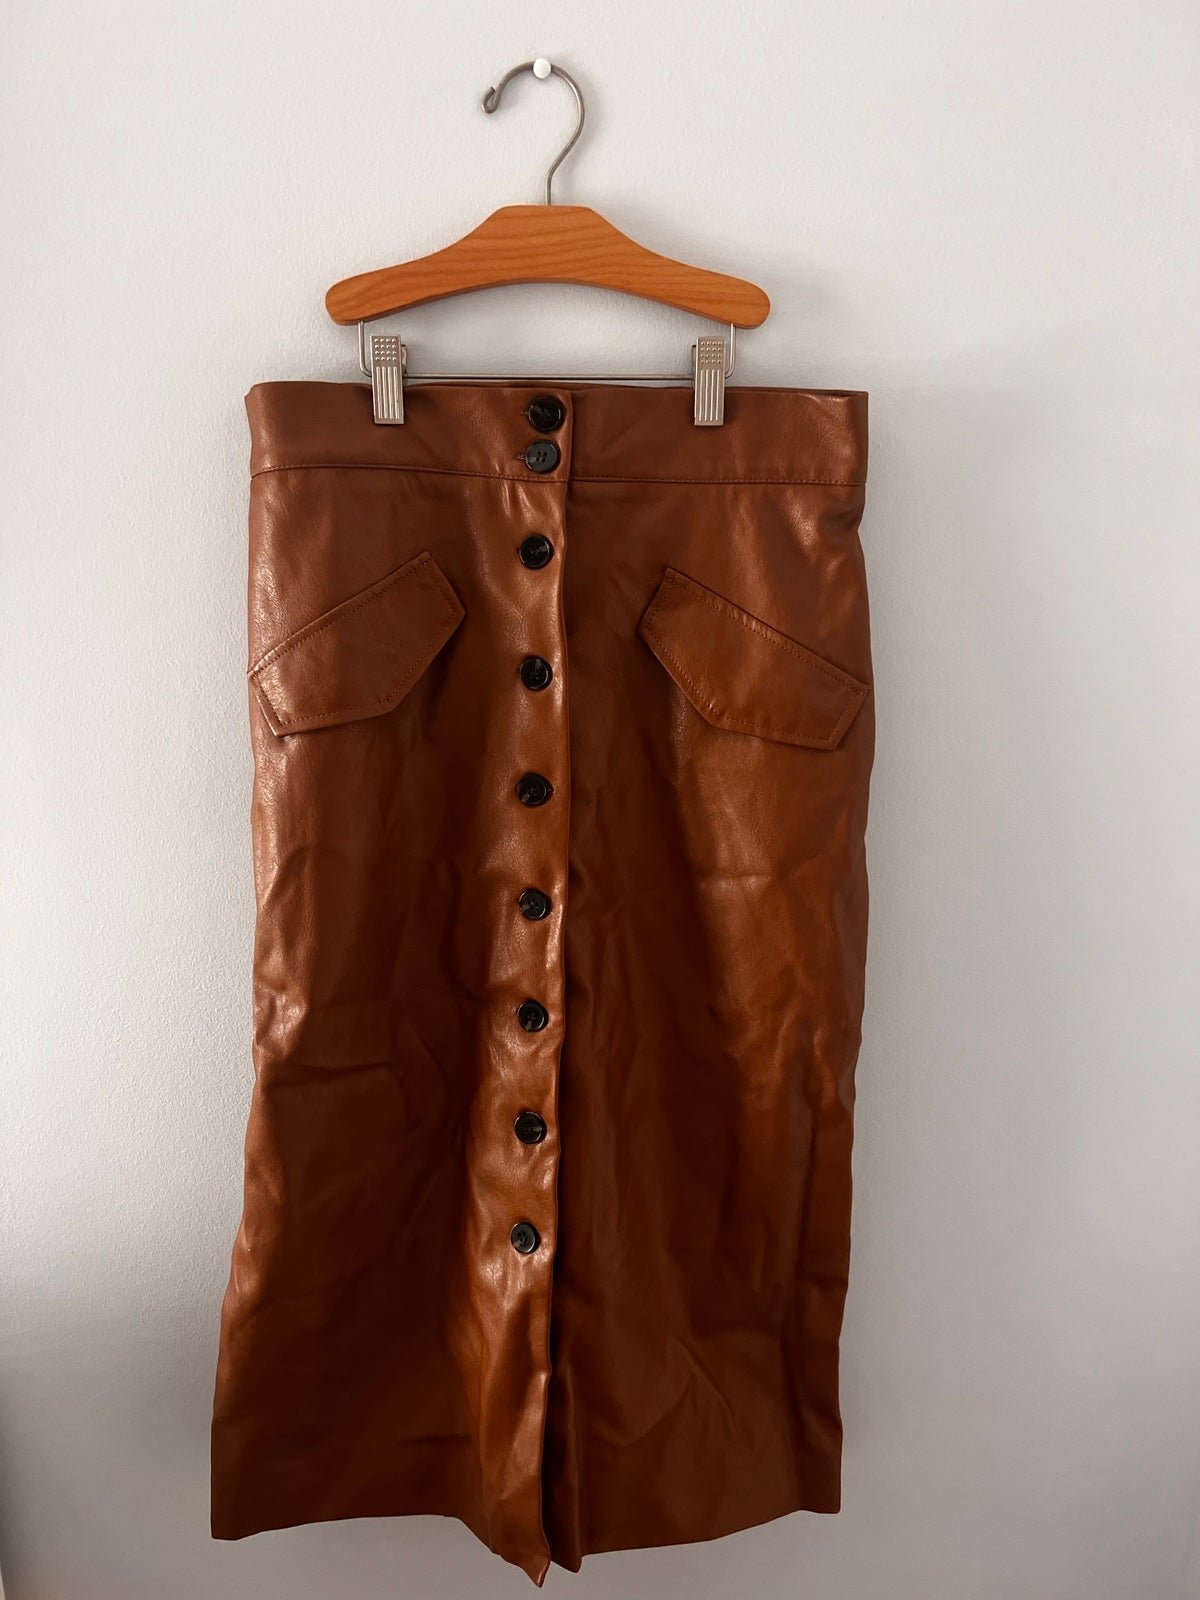 Cheap H&M Leather Skirt IxN2IBlO1 Everyday Low Prices